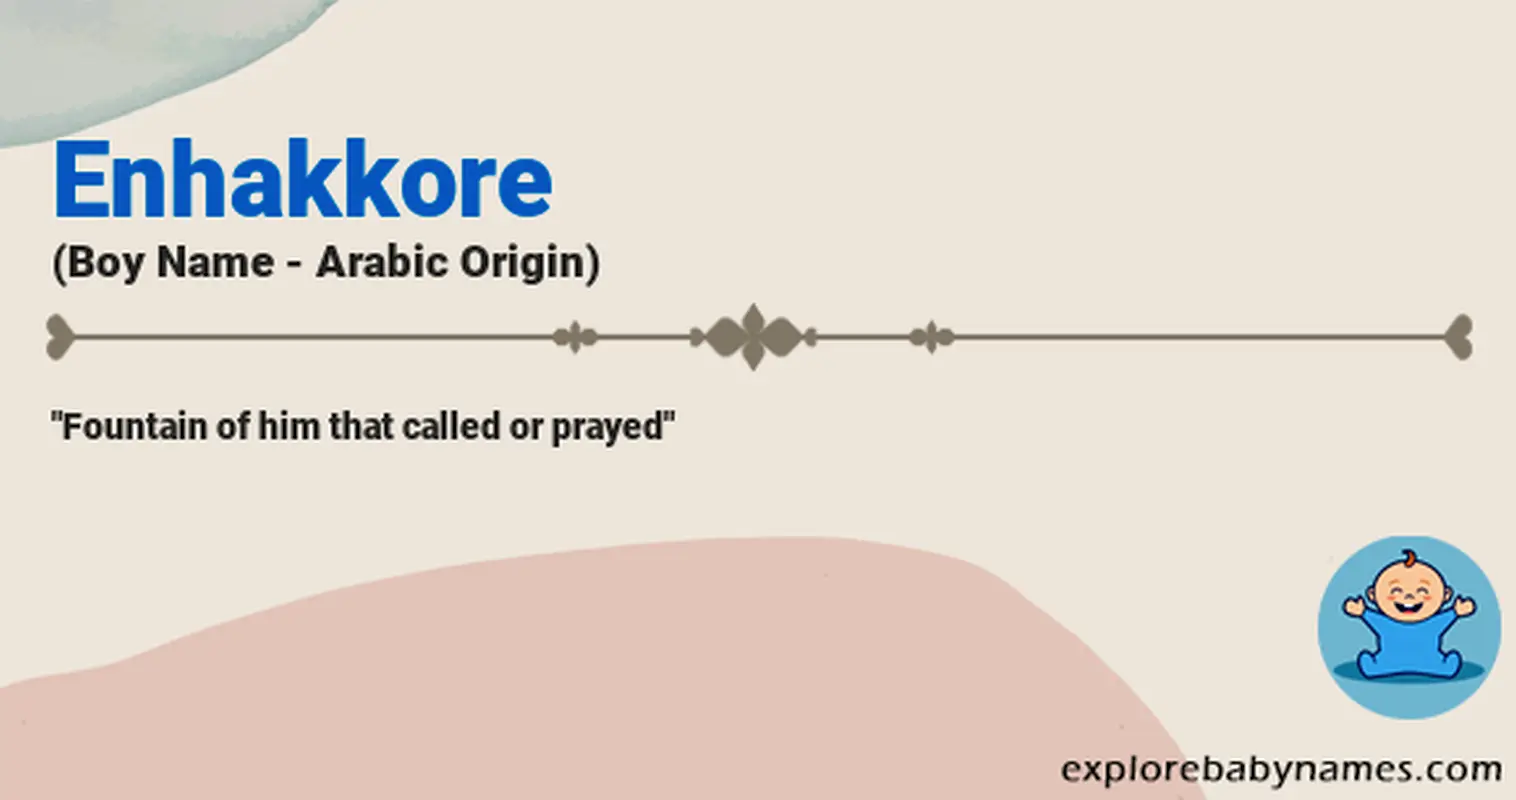 Meaning of Enhakkore